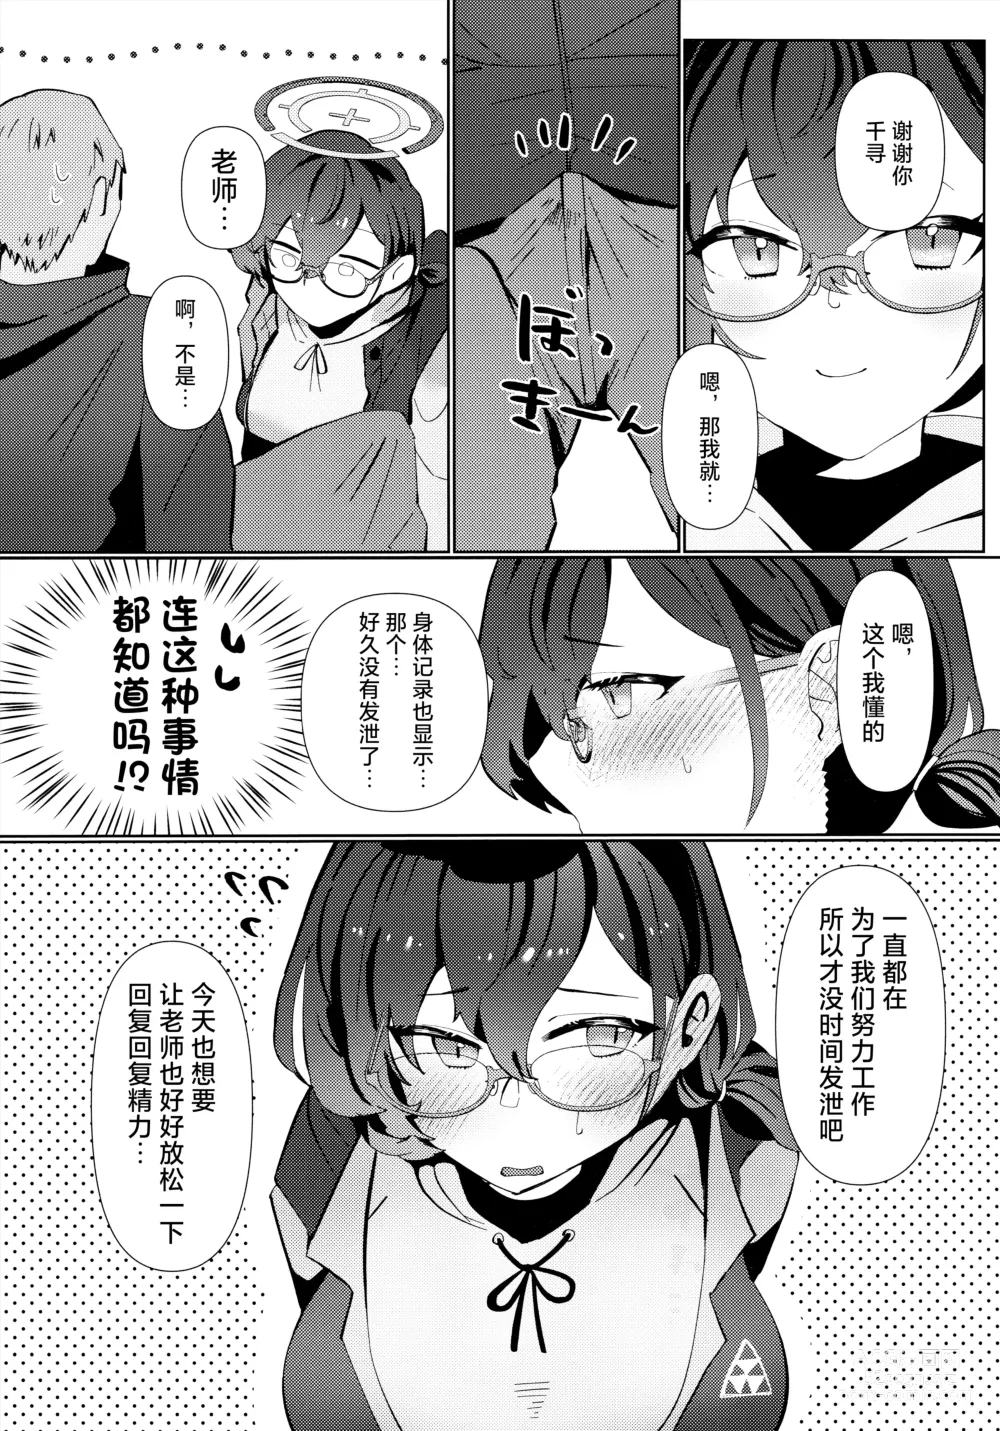 Page 7 of doujinshi 夜半时分的骇入